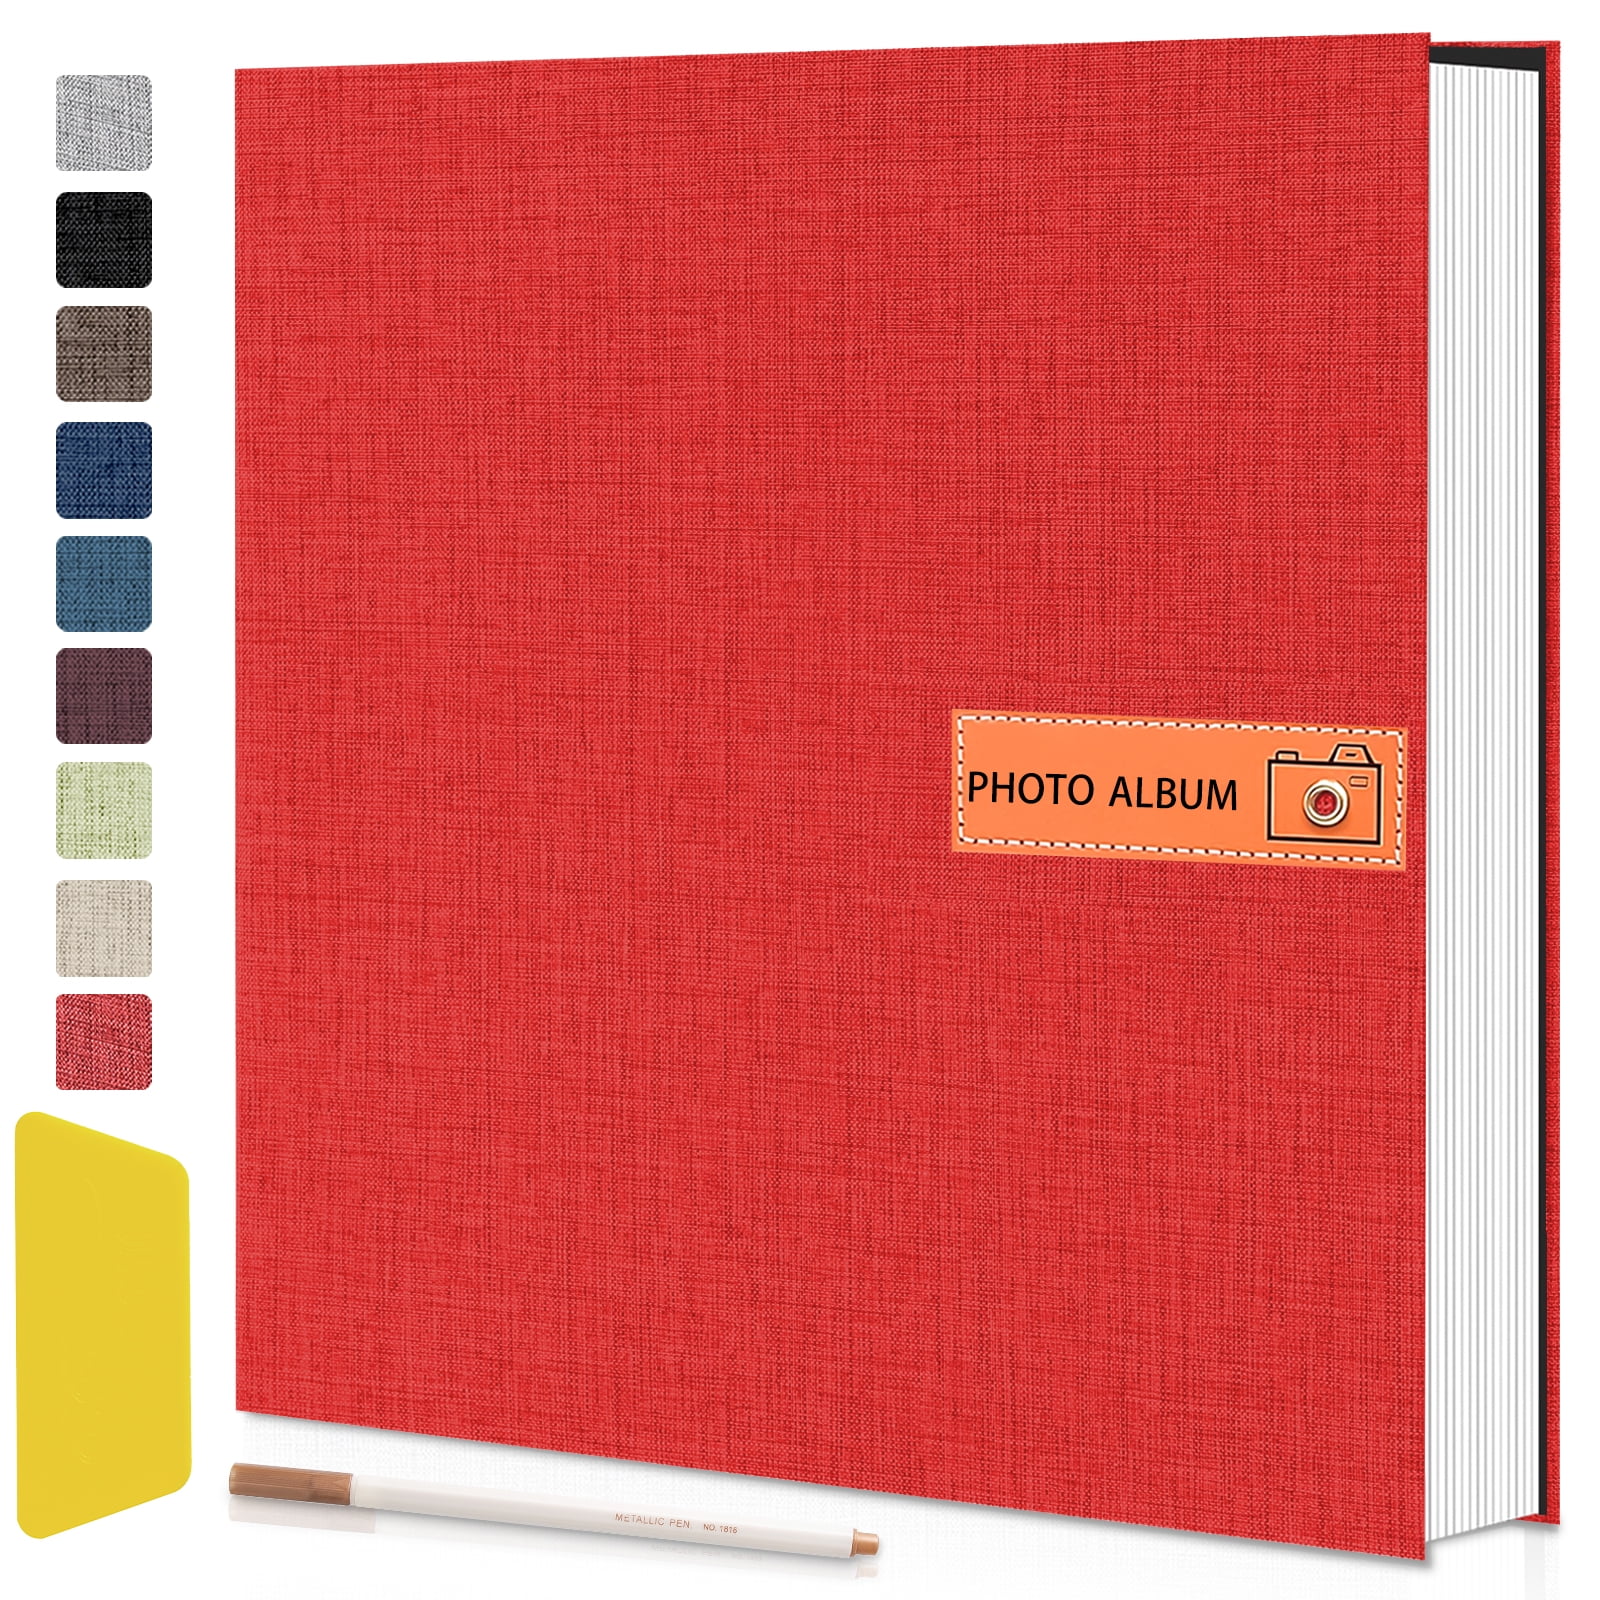 Self-Adhesive Photo Album, 100 Pages Self-Stick Page DIY